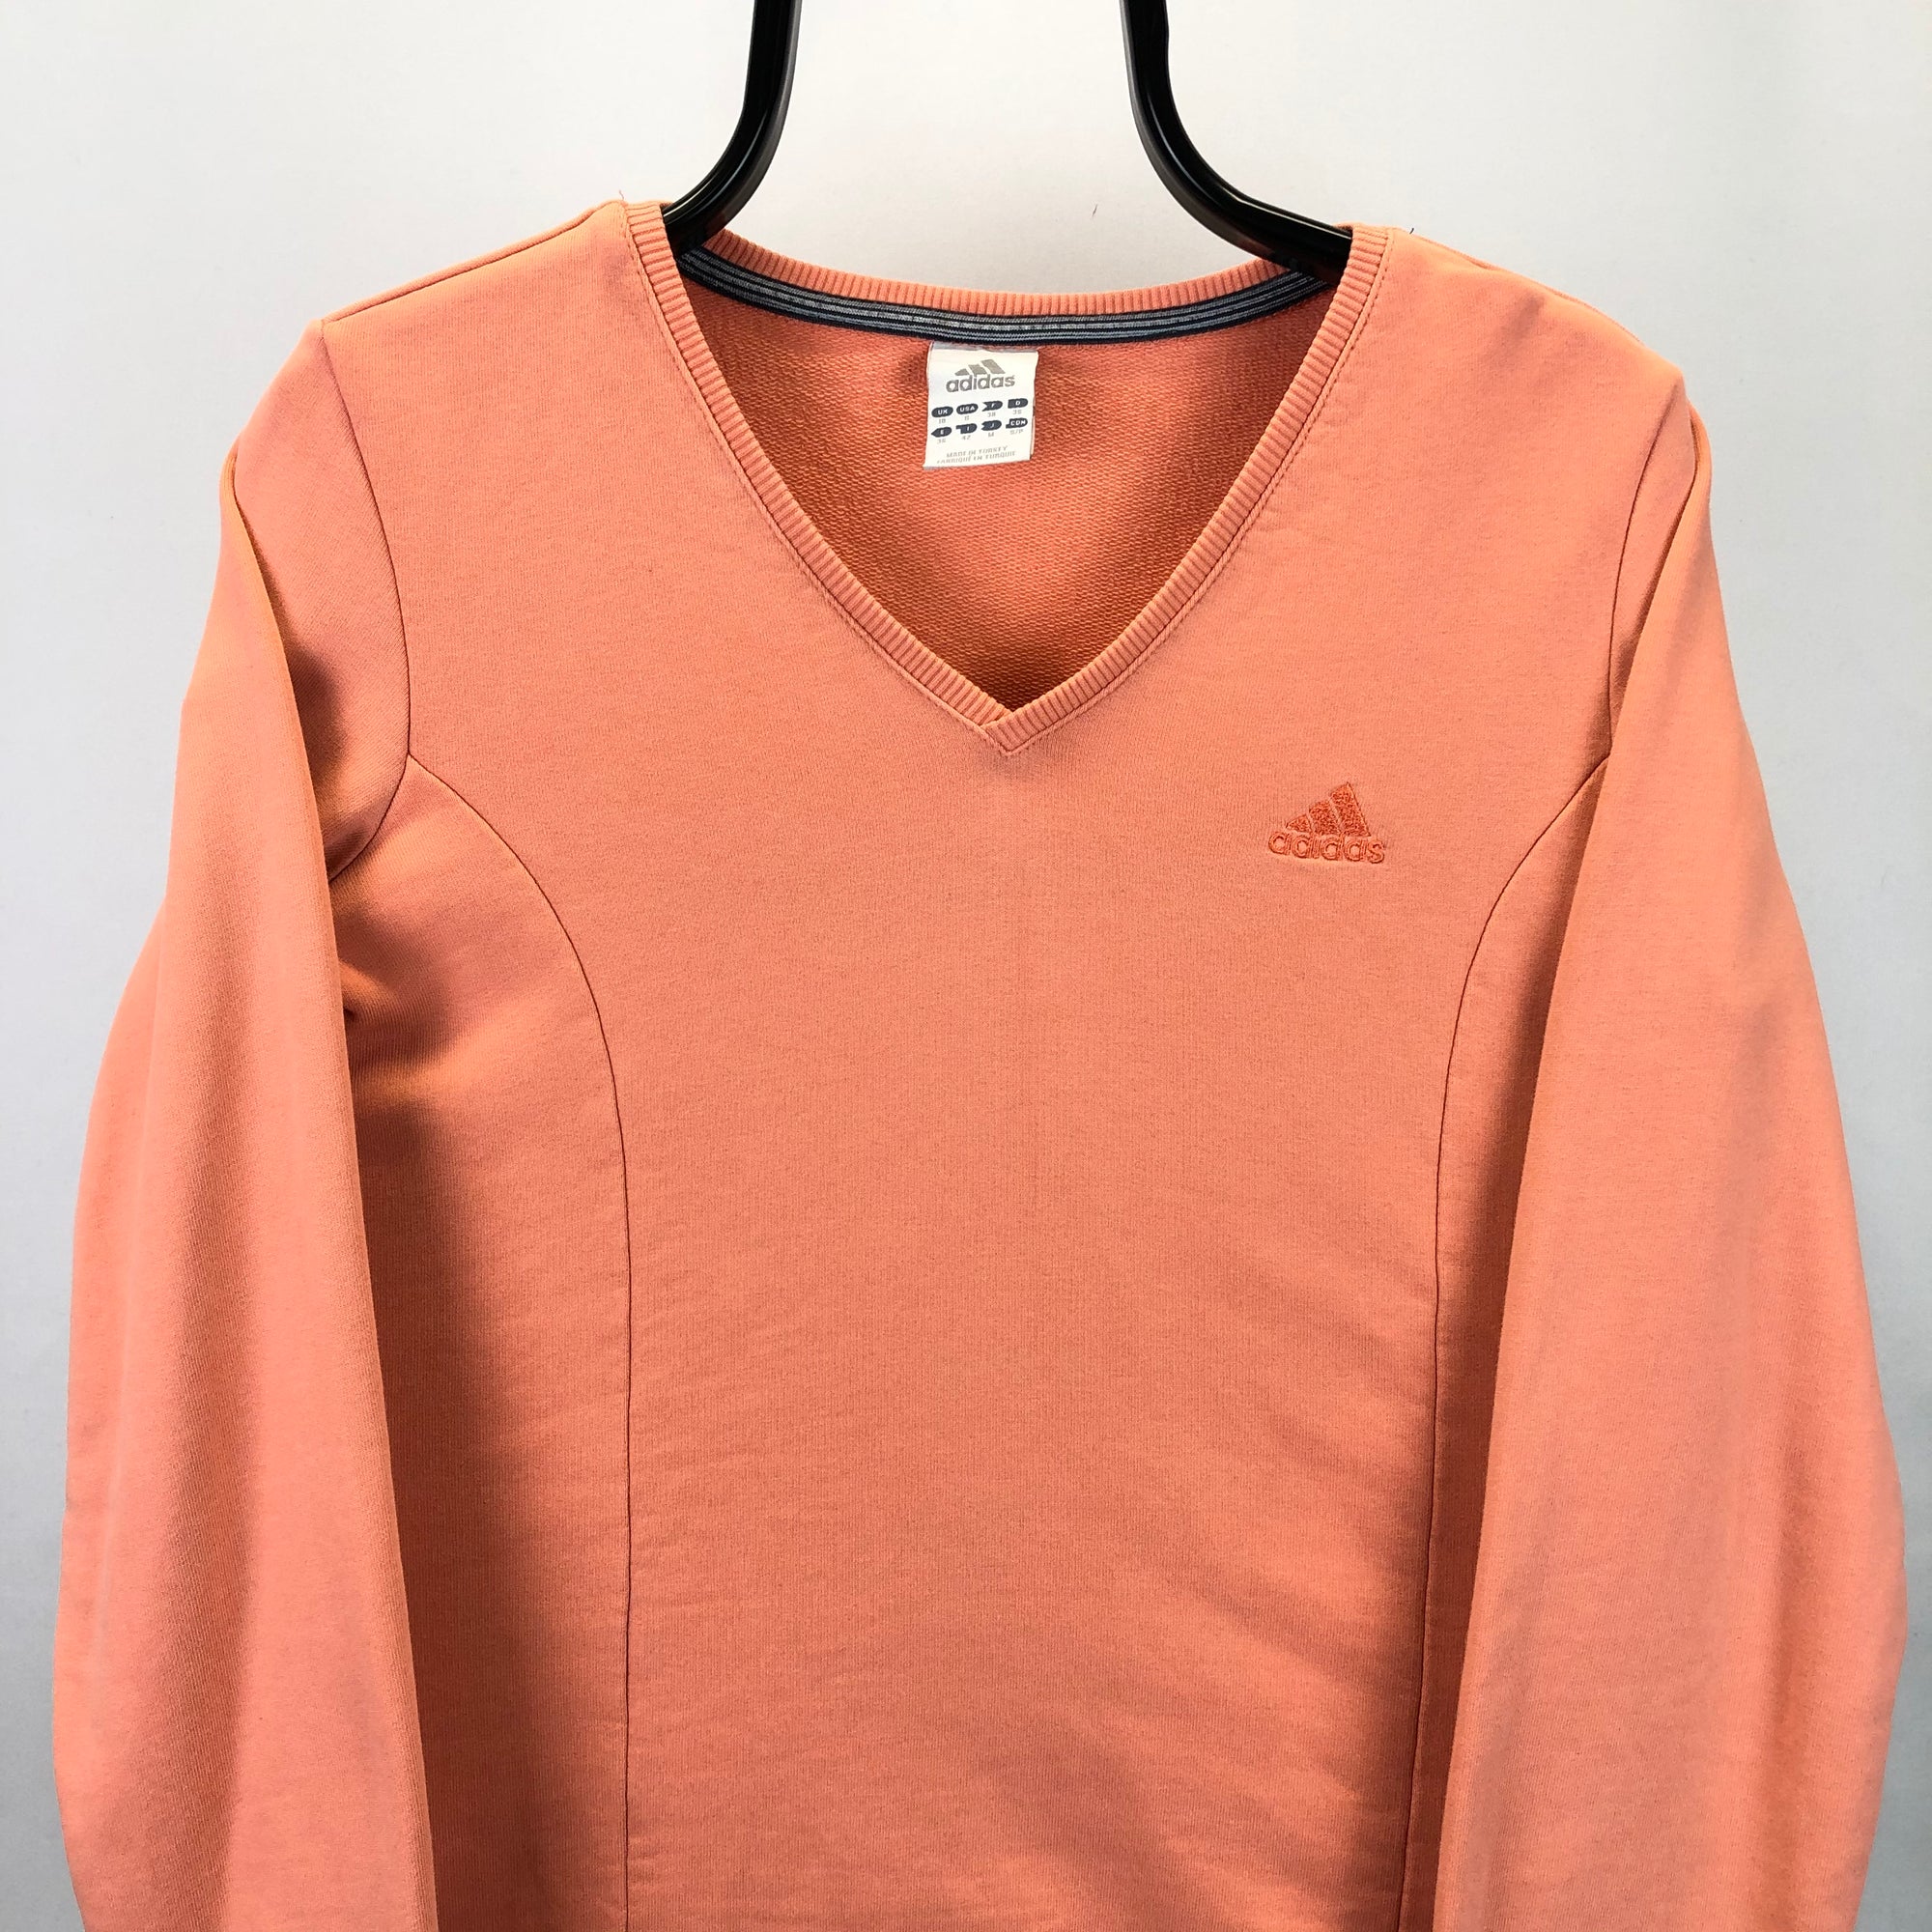 Adidas Embroidered Small Logo Sweatshirt in Peach - Men's XS/Women's Small